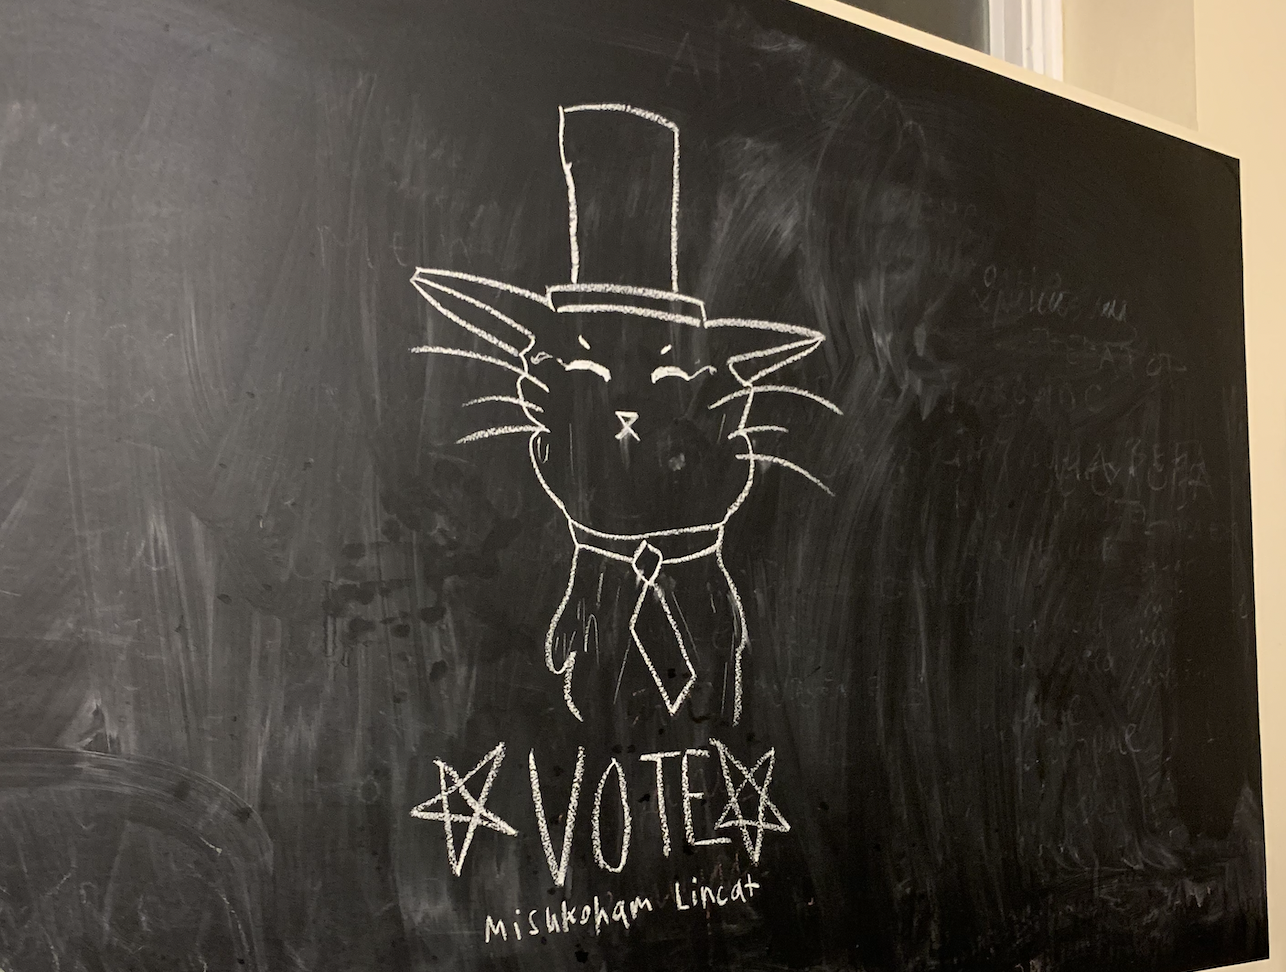 A chalk drawing of a cat wearing a top hat and a tie, facing the viewer. *VOTE* is written below in large letters, “Mishkoham Lincat” in smaller letters below. 